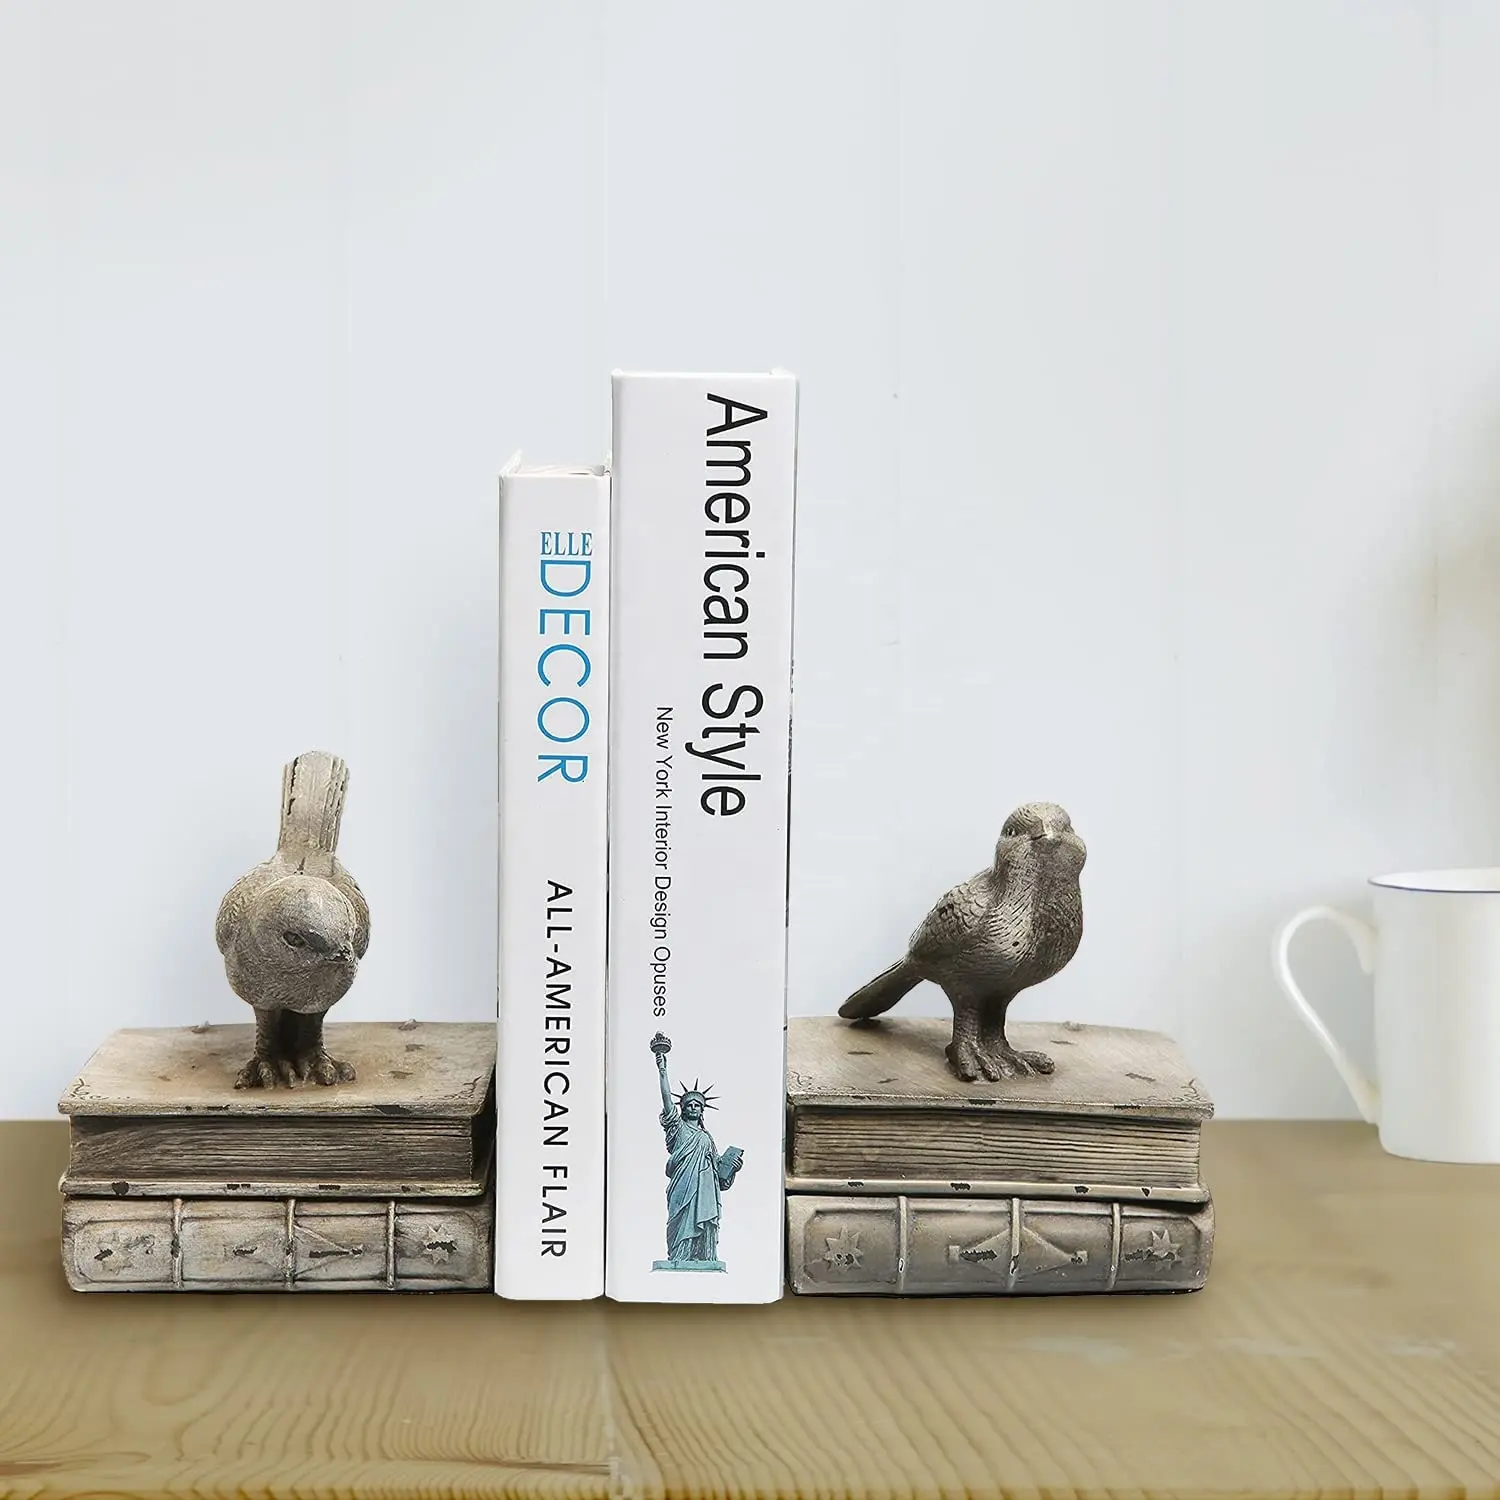 ARTMADE Rustic Modern Style Vintage Resin Bookends For Kids Adjustable Bookends Bookshelf Decorative with Bird and Book Design